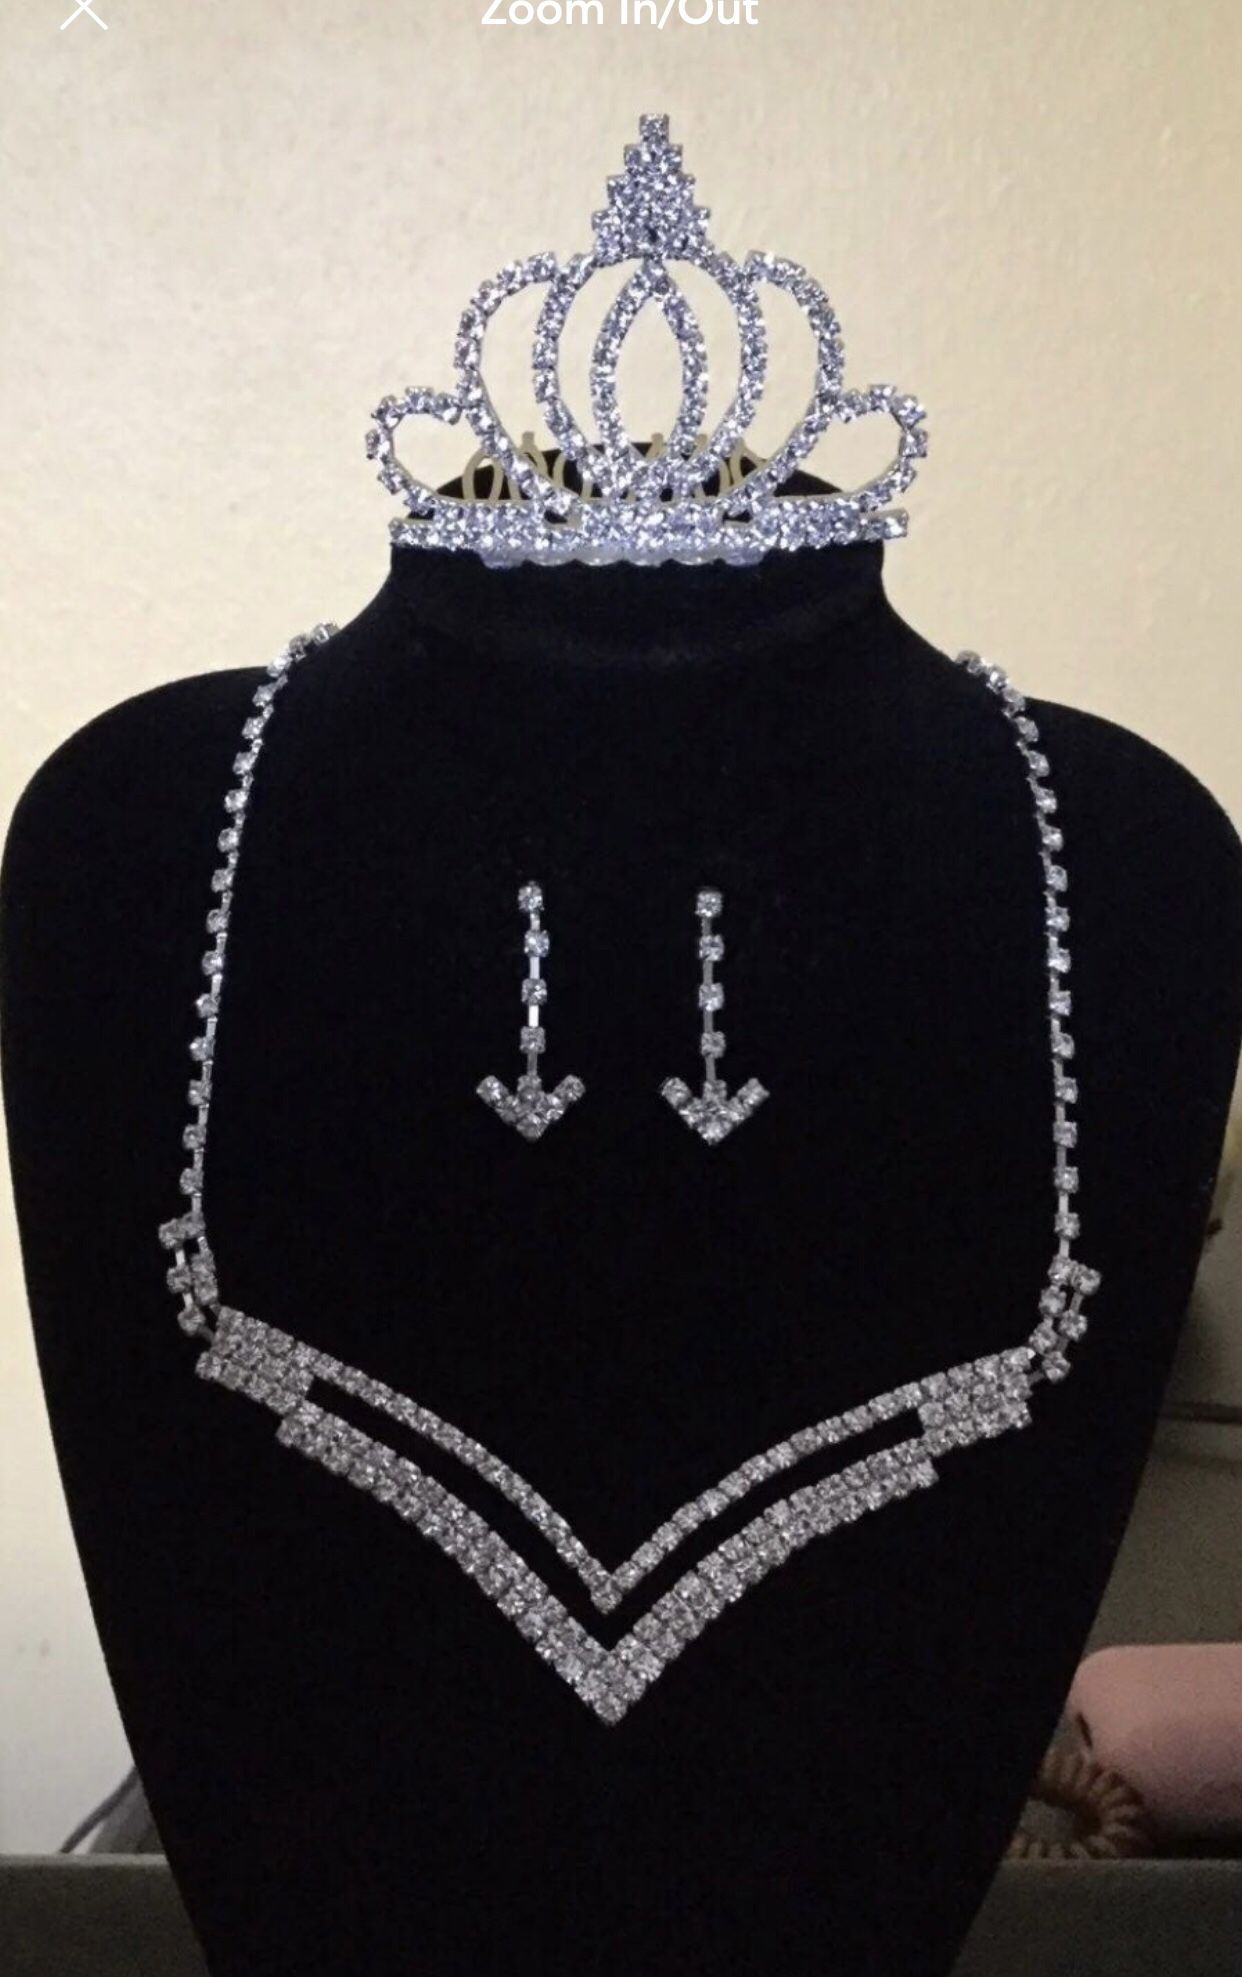 Wedding Party Prom Crystal Necklace Earrings Tiara jewelry set